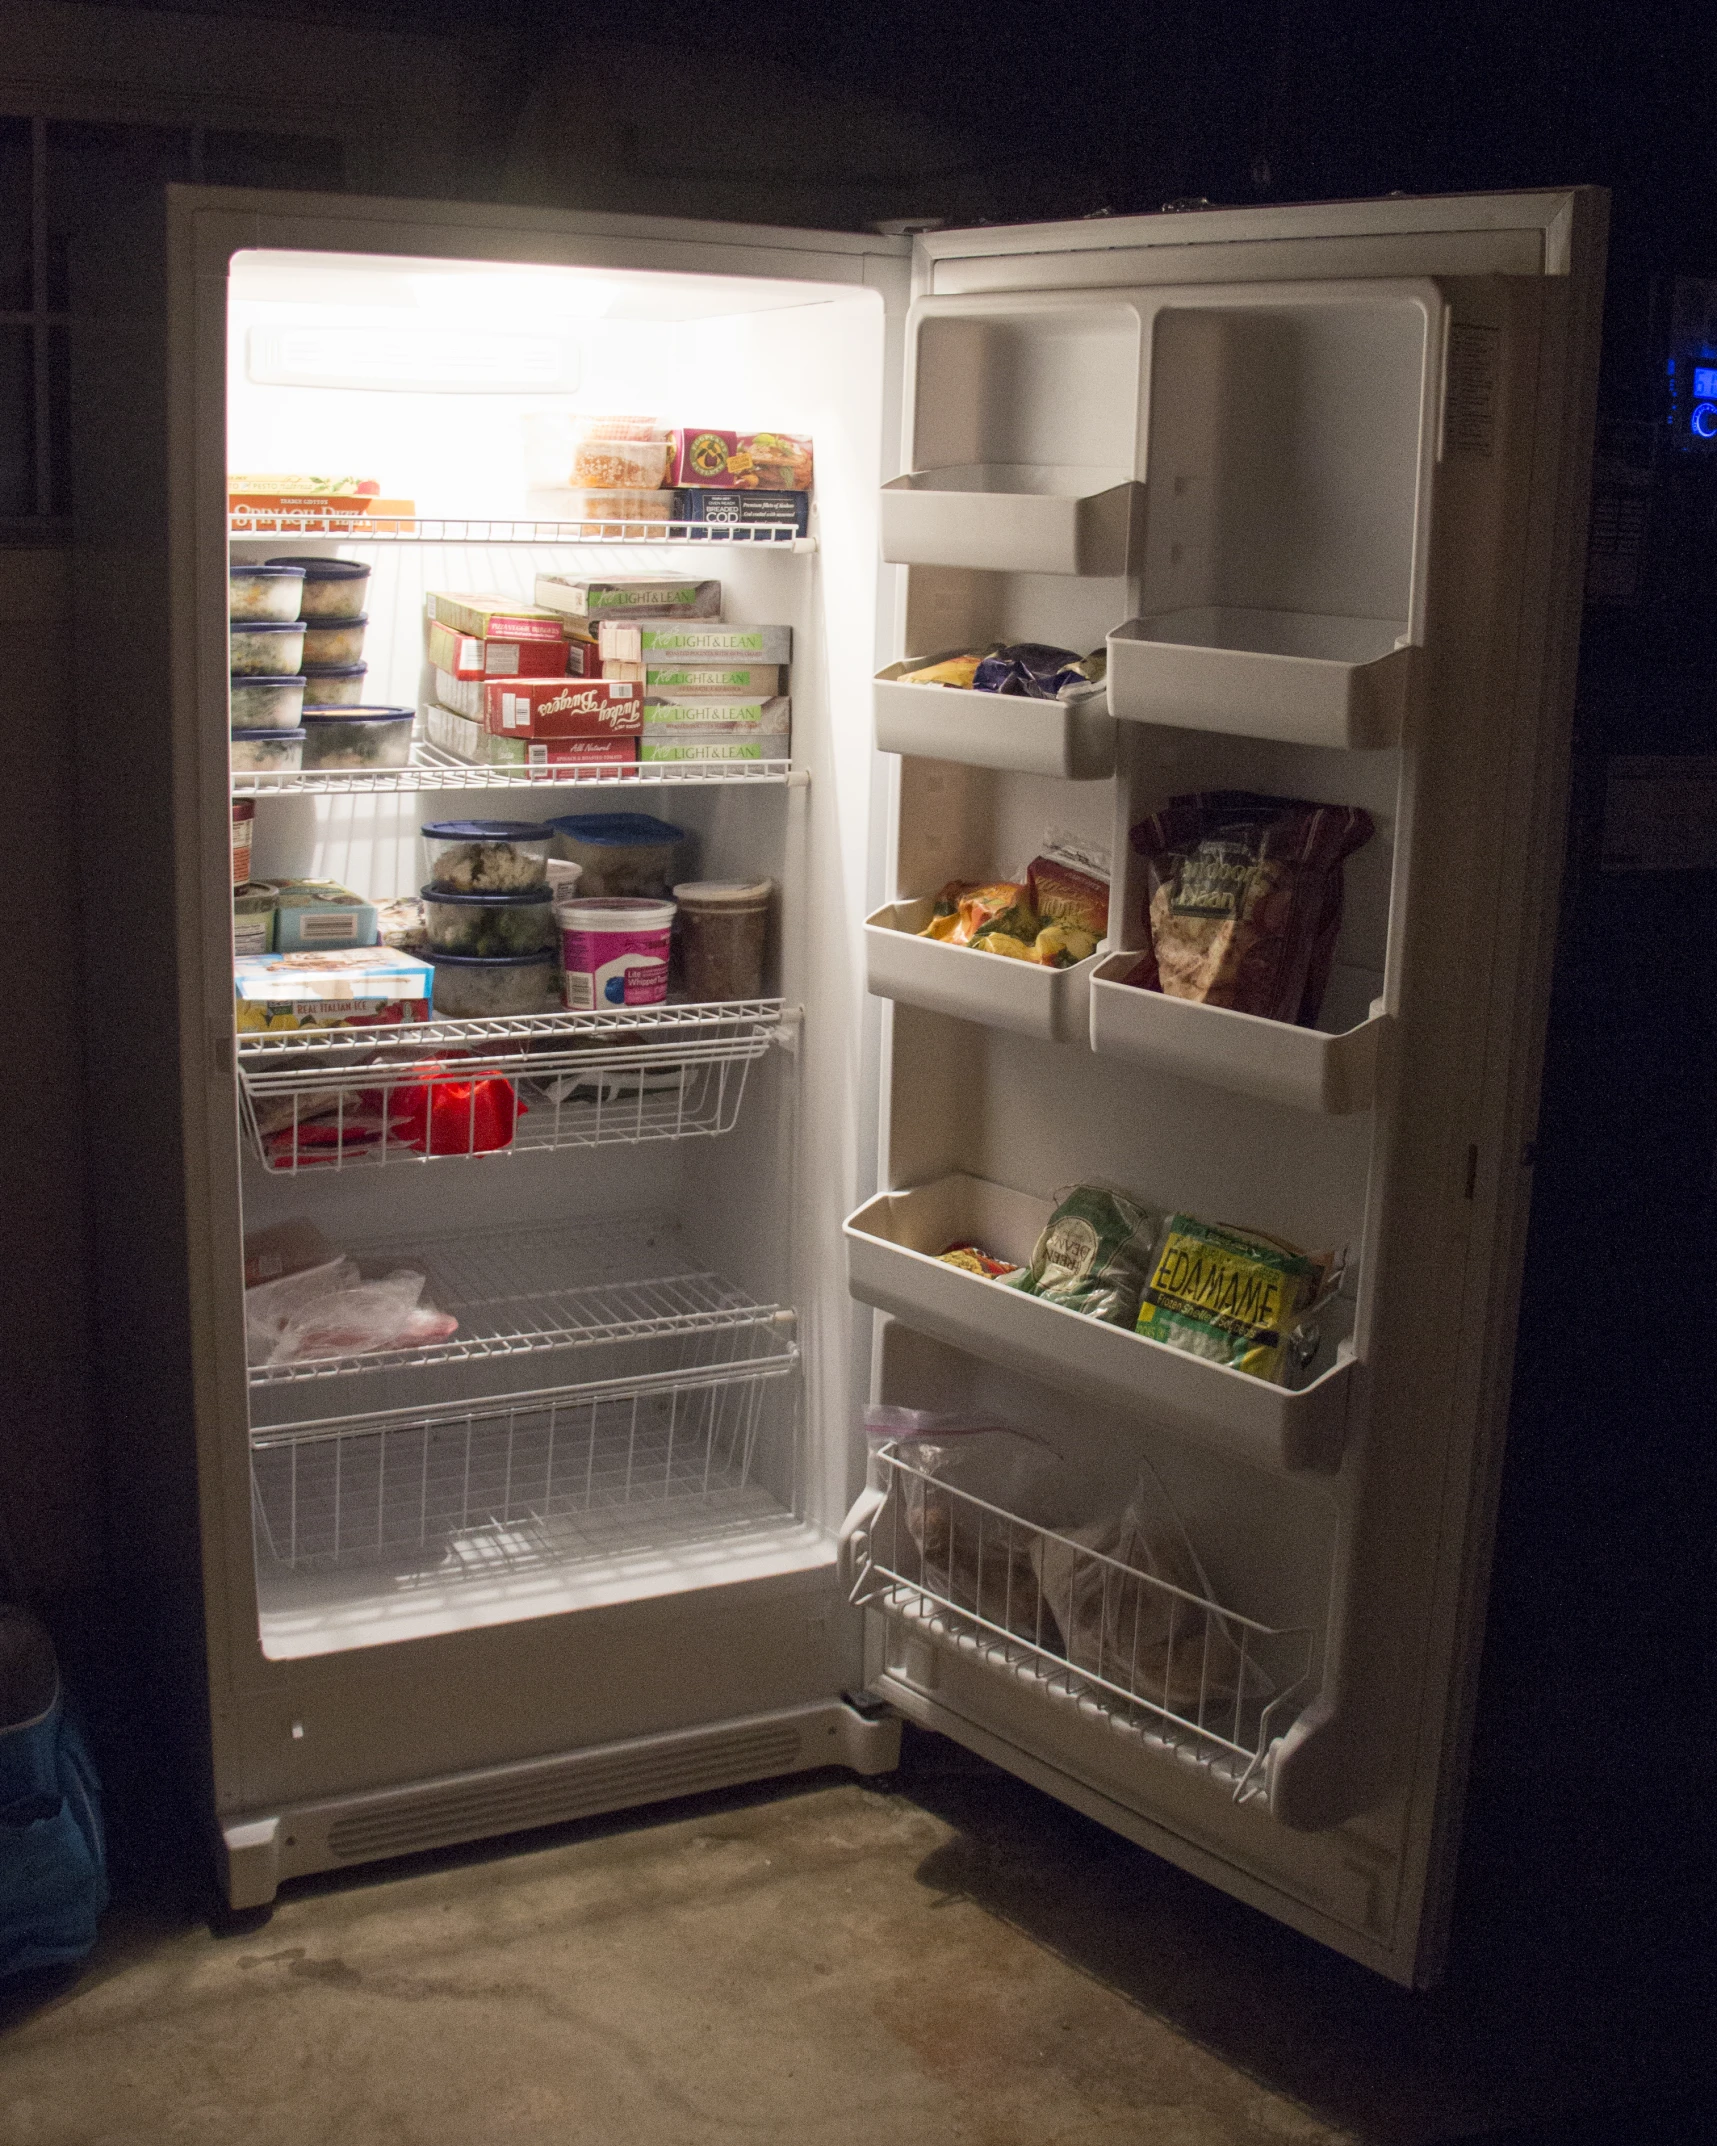 a fridge full of food and drinks in the dark